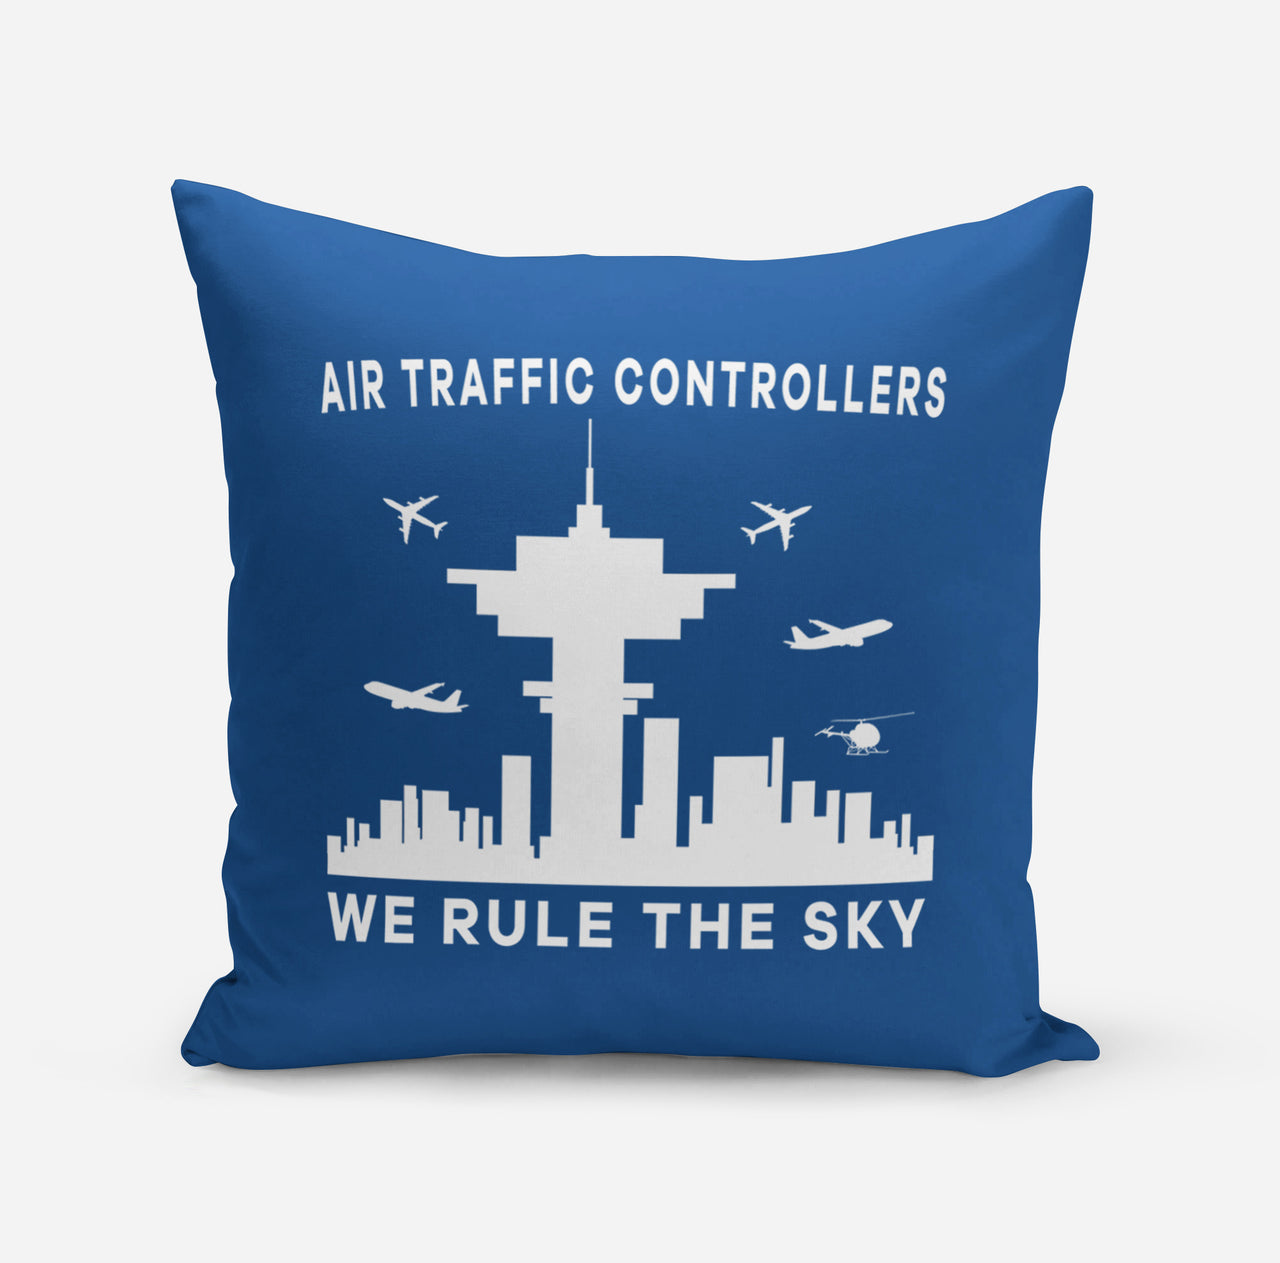 Air Traffic Controllers - We Rule The Sky Designed Pillows